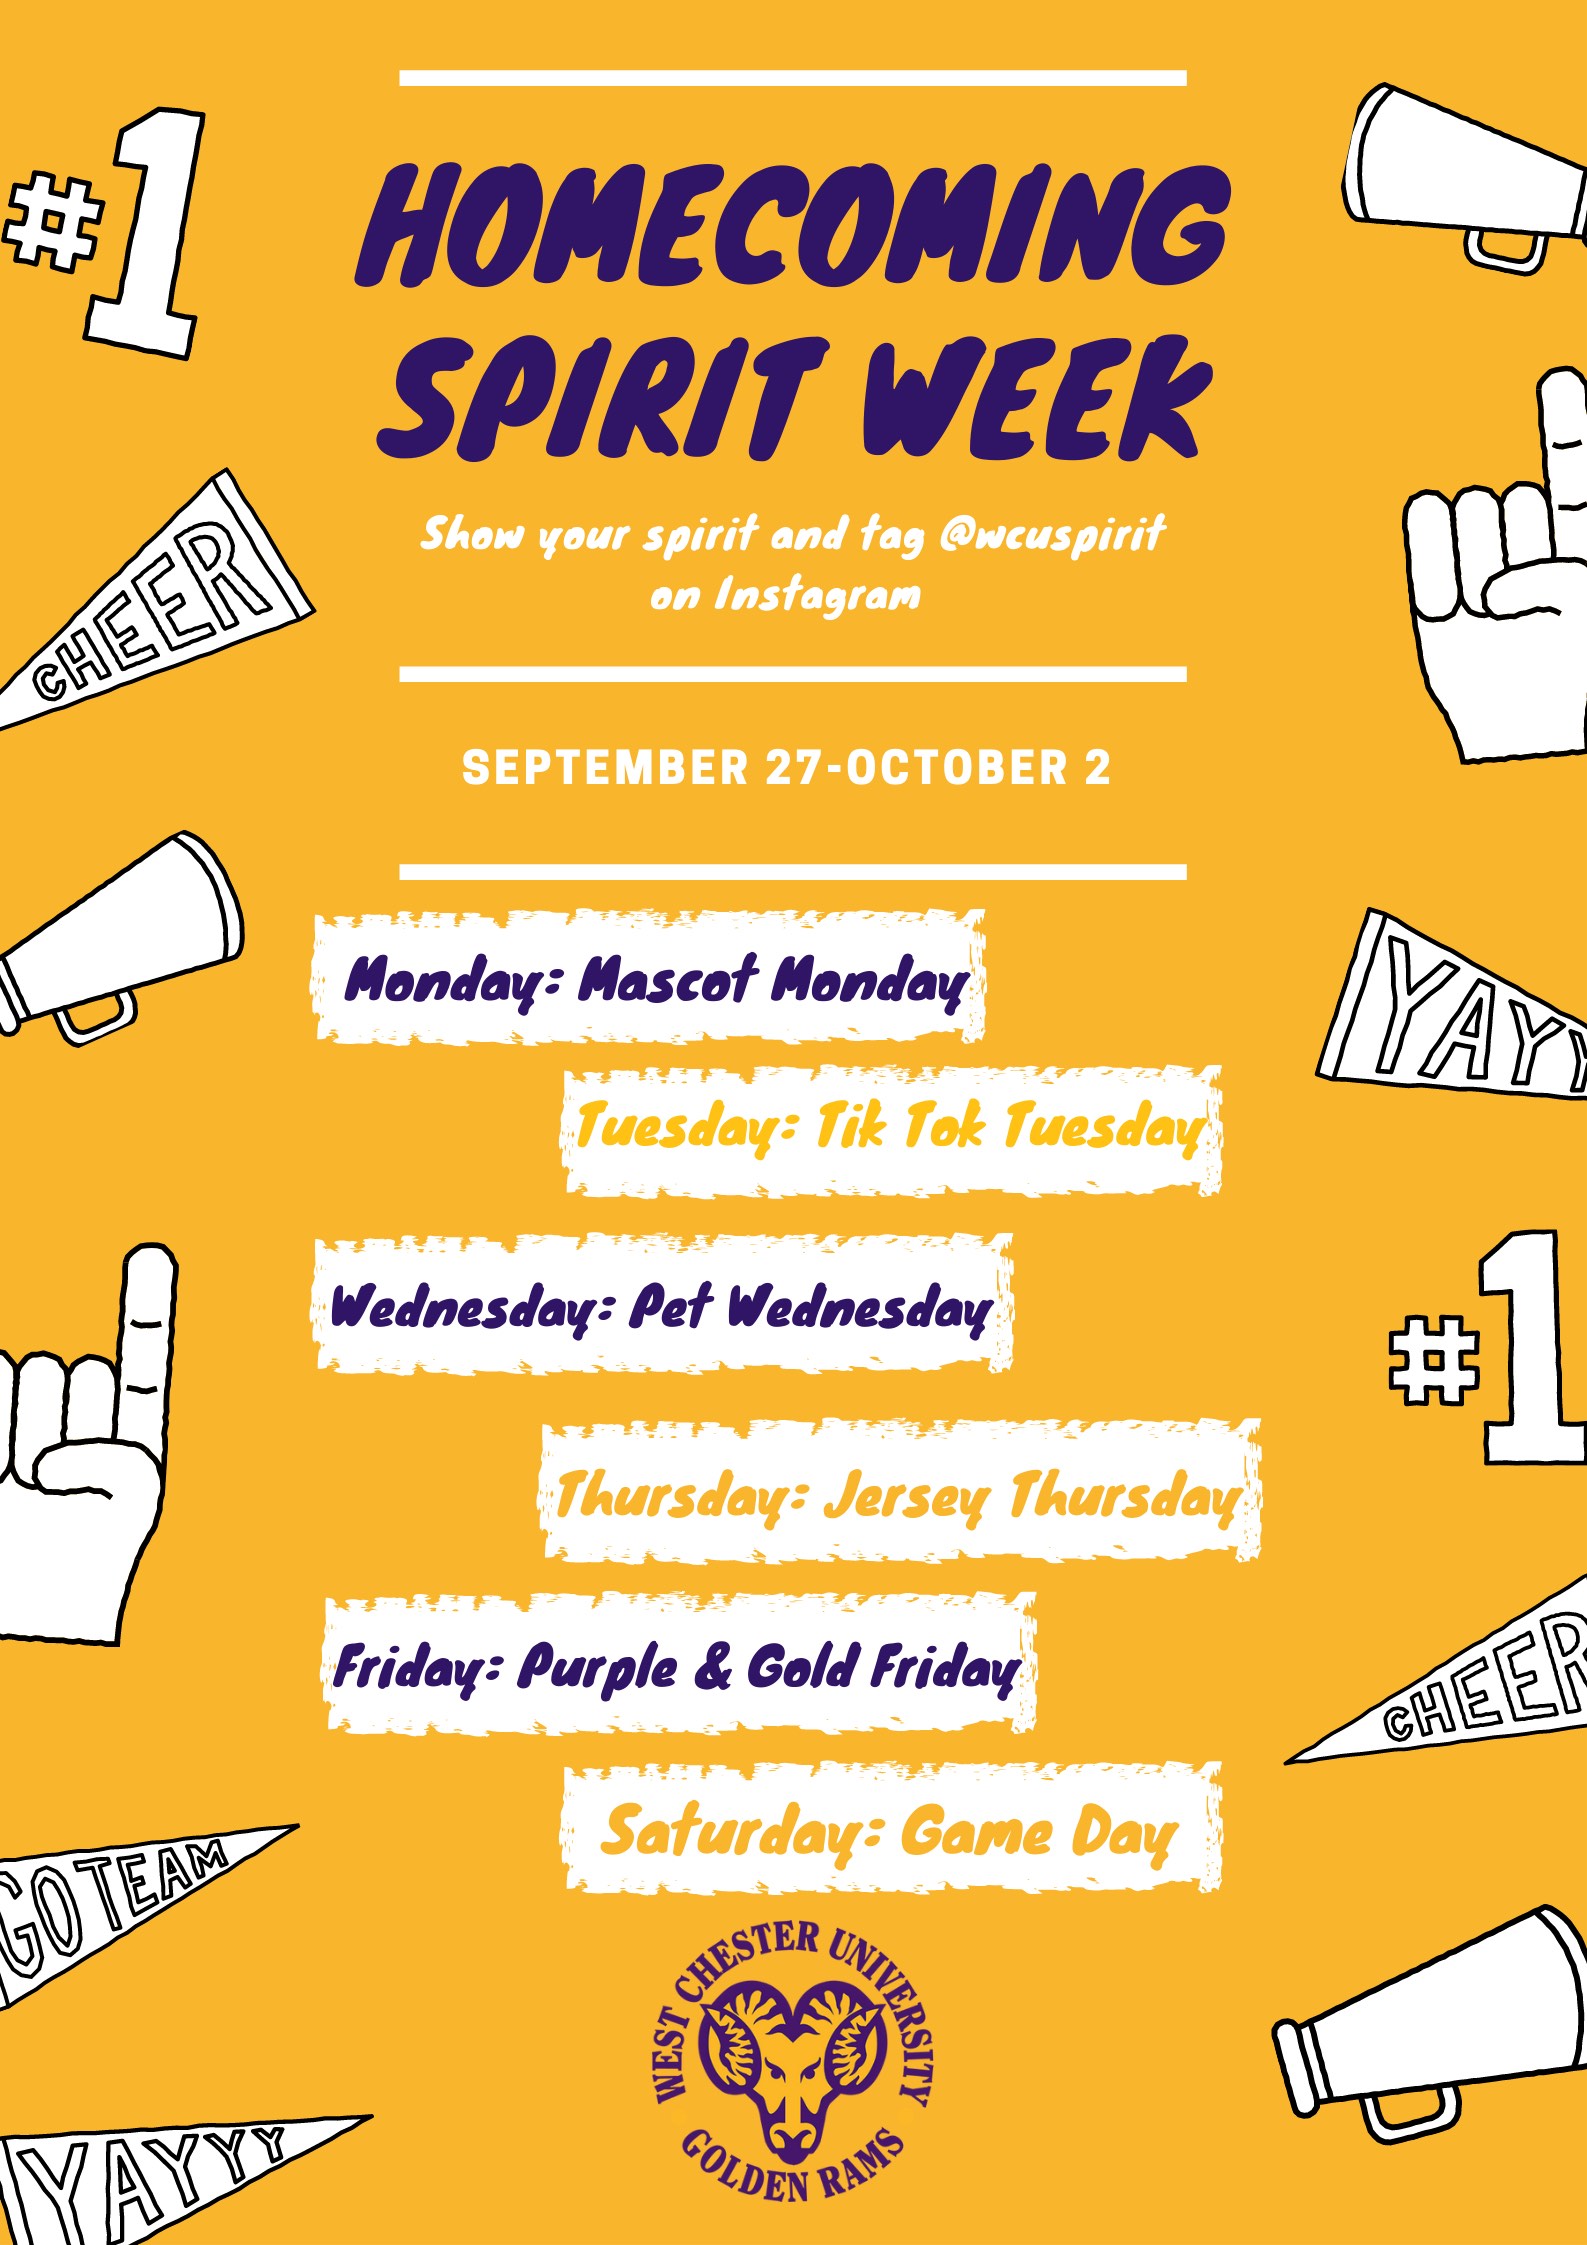 Homecoming Spirit Week show your spirit and tag @wcuspirit on instagram. September 27-October 2 Monday: Mascot Monday Tuesday: Tik Tok Tuesday Wednesday: Pet Wednesday Thursday" Jersey Thursday Friday: Purple and Gold Friday Saturday Game Day